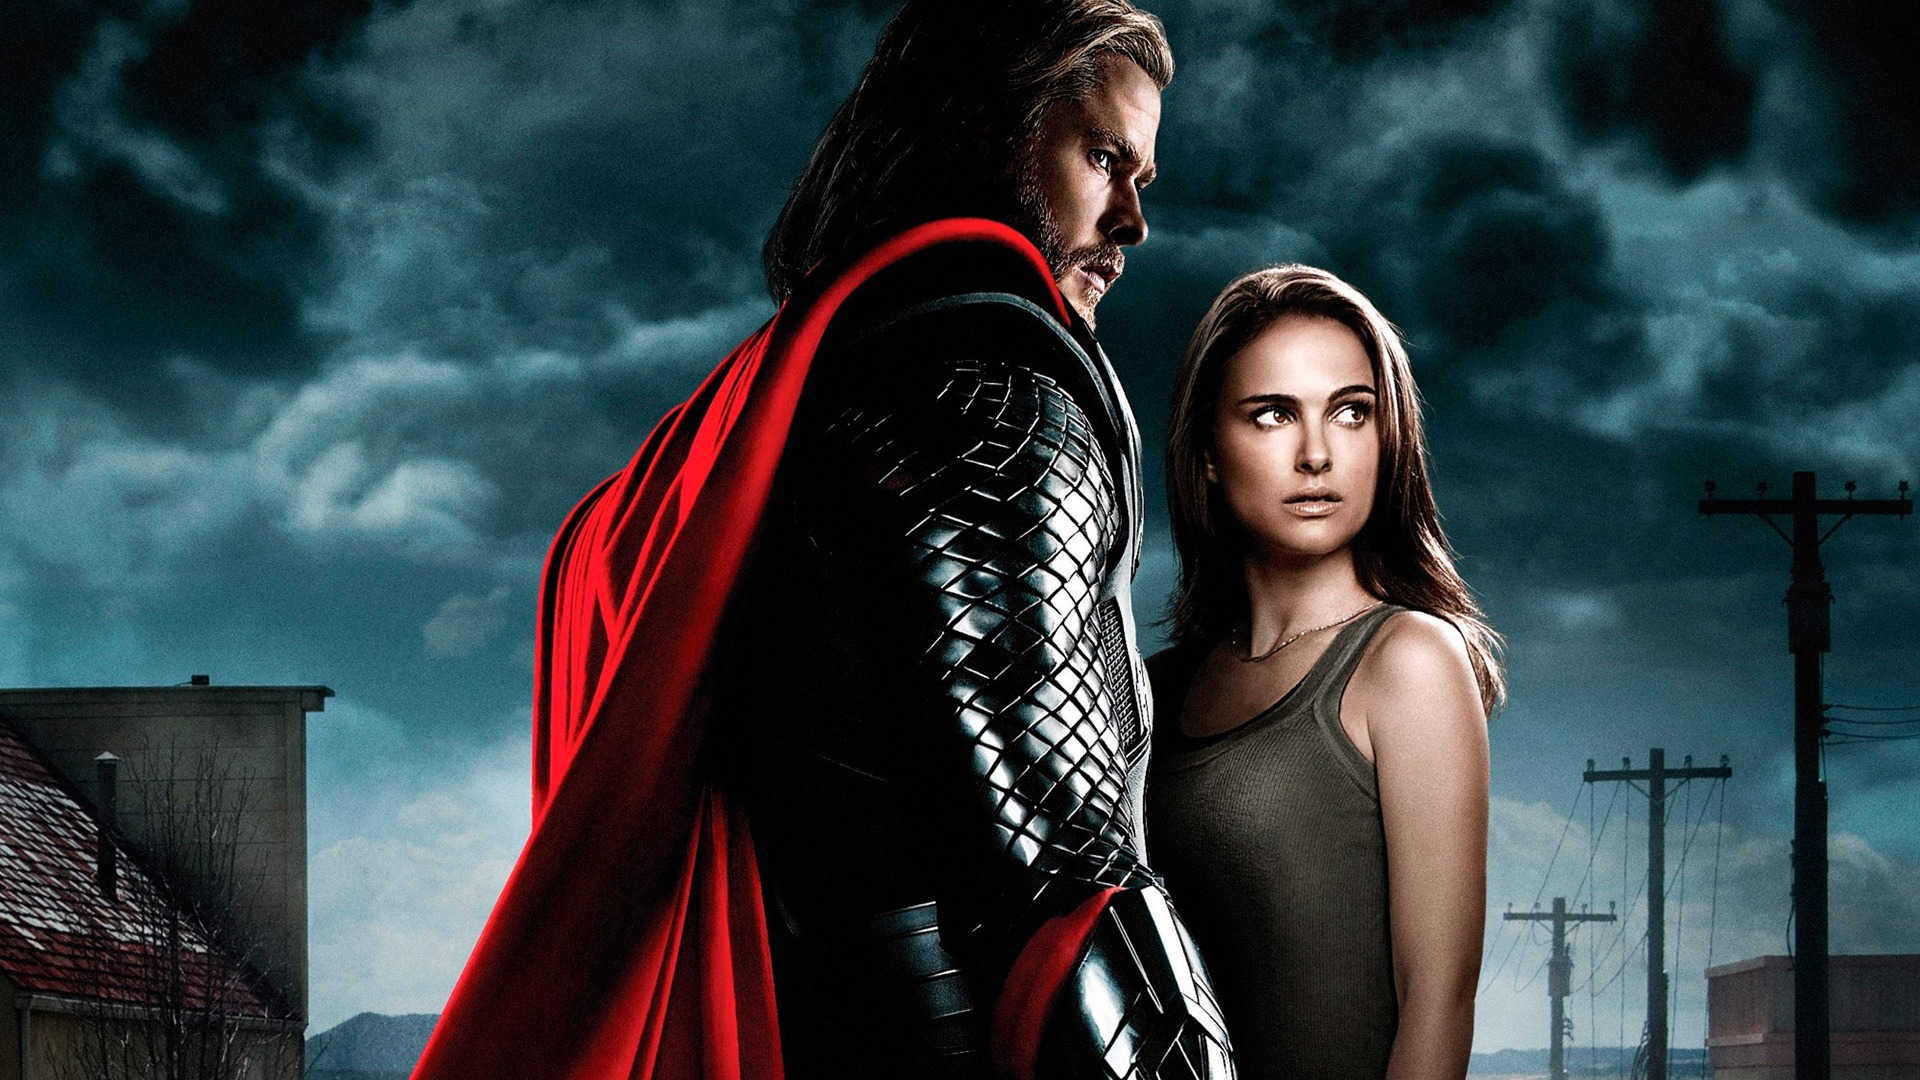 Thor and Jane Foster for 1920 x 1080 HDTV 1080p resolution